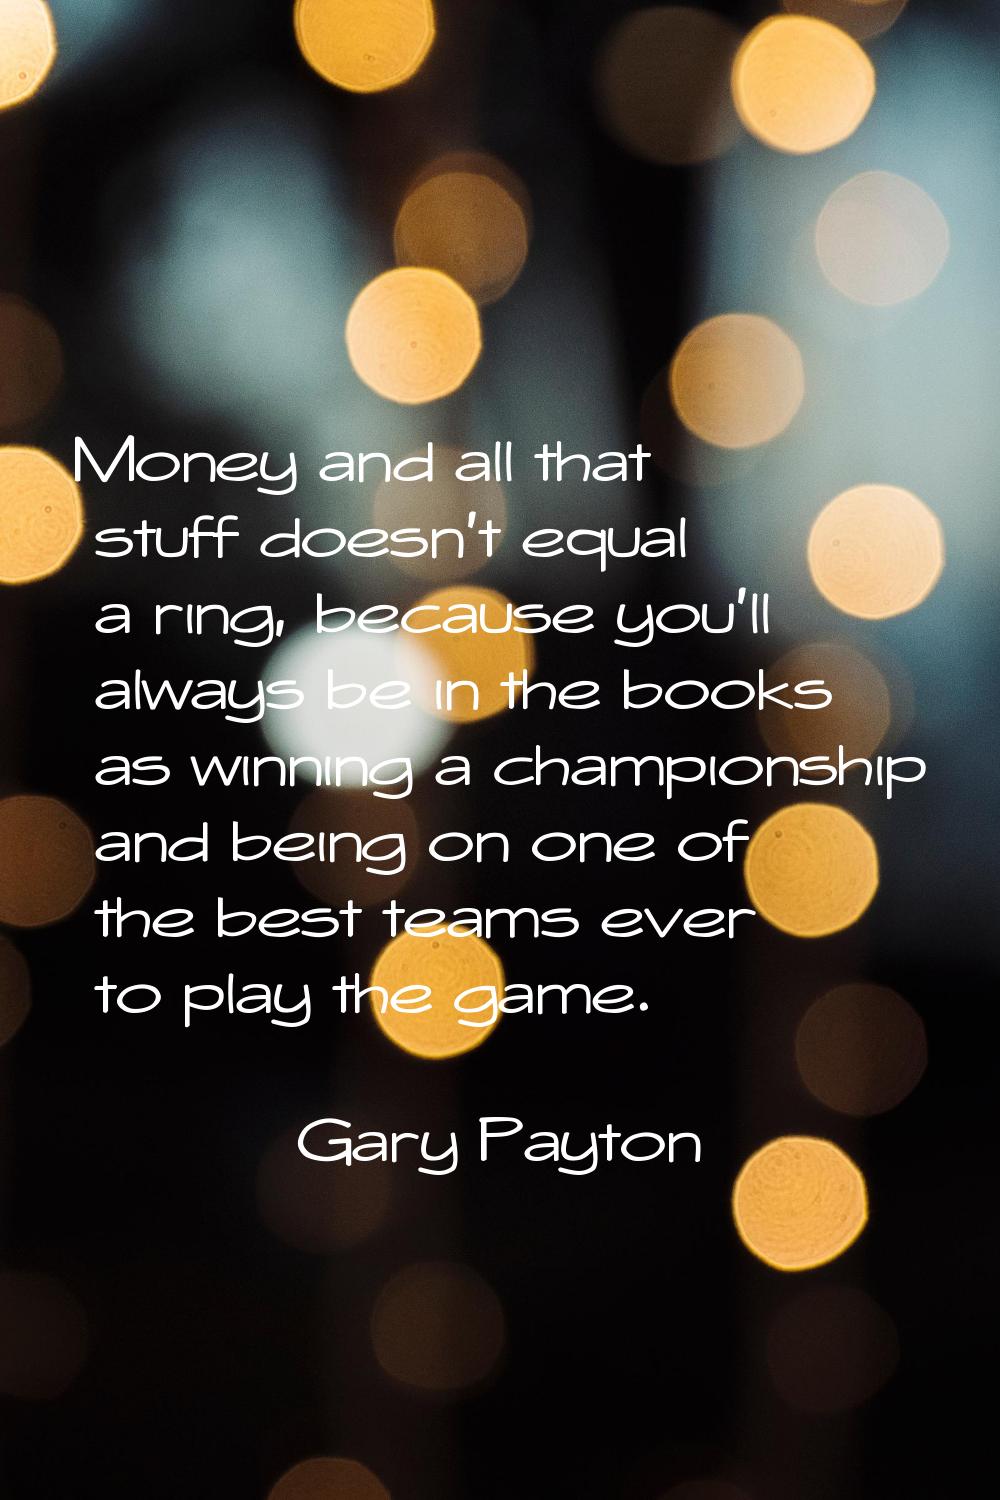 Money and all that stuff doesn't equal a ring, because you'll always be in the books as winning a c